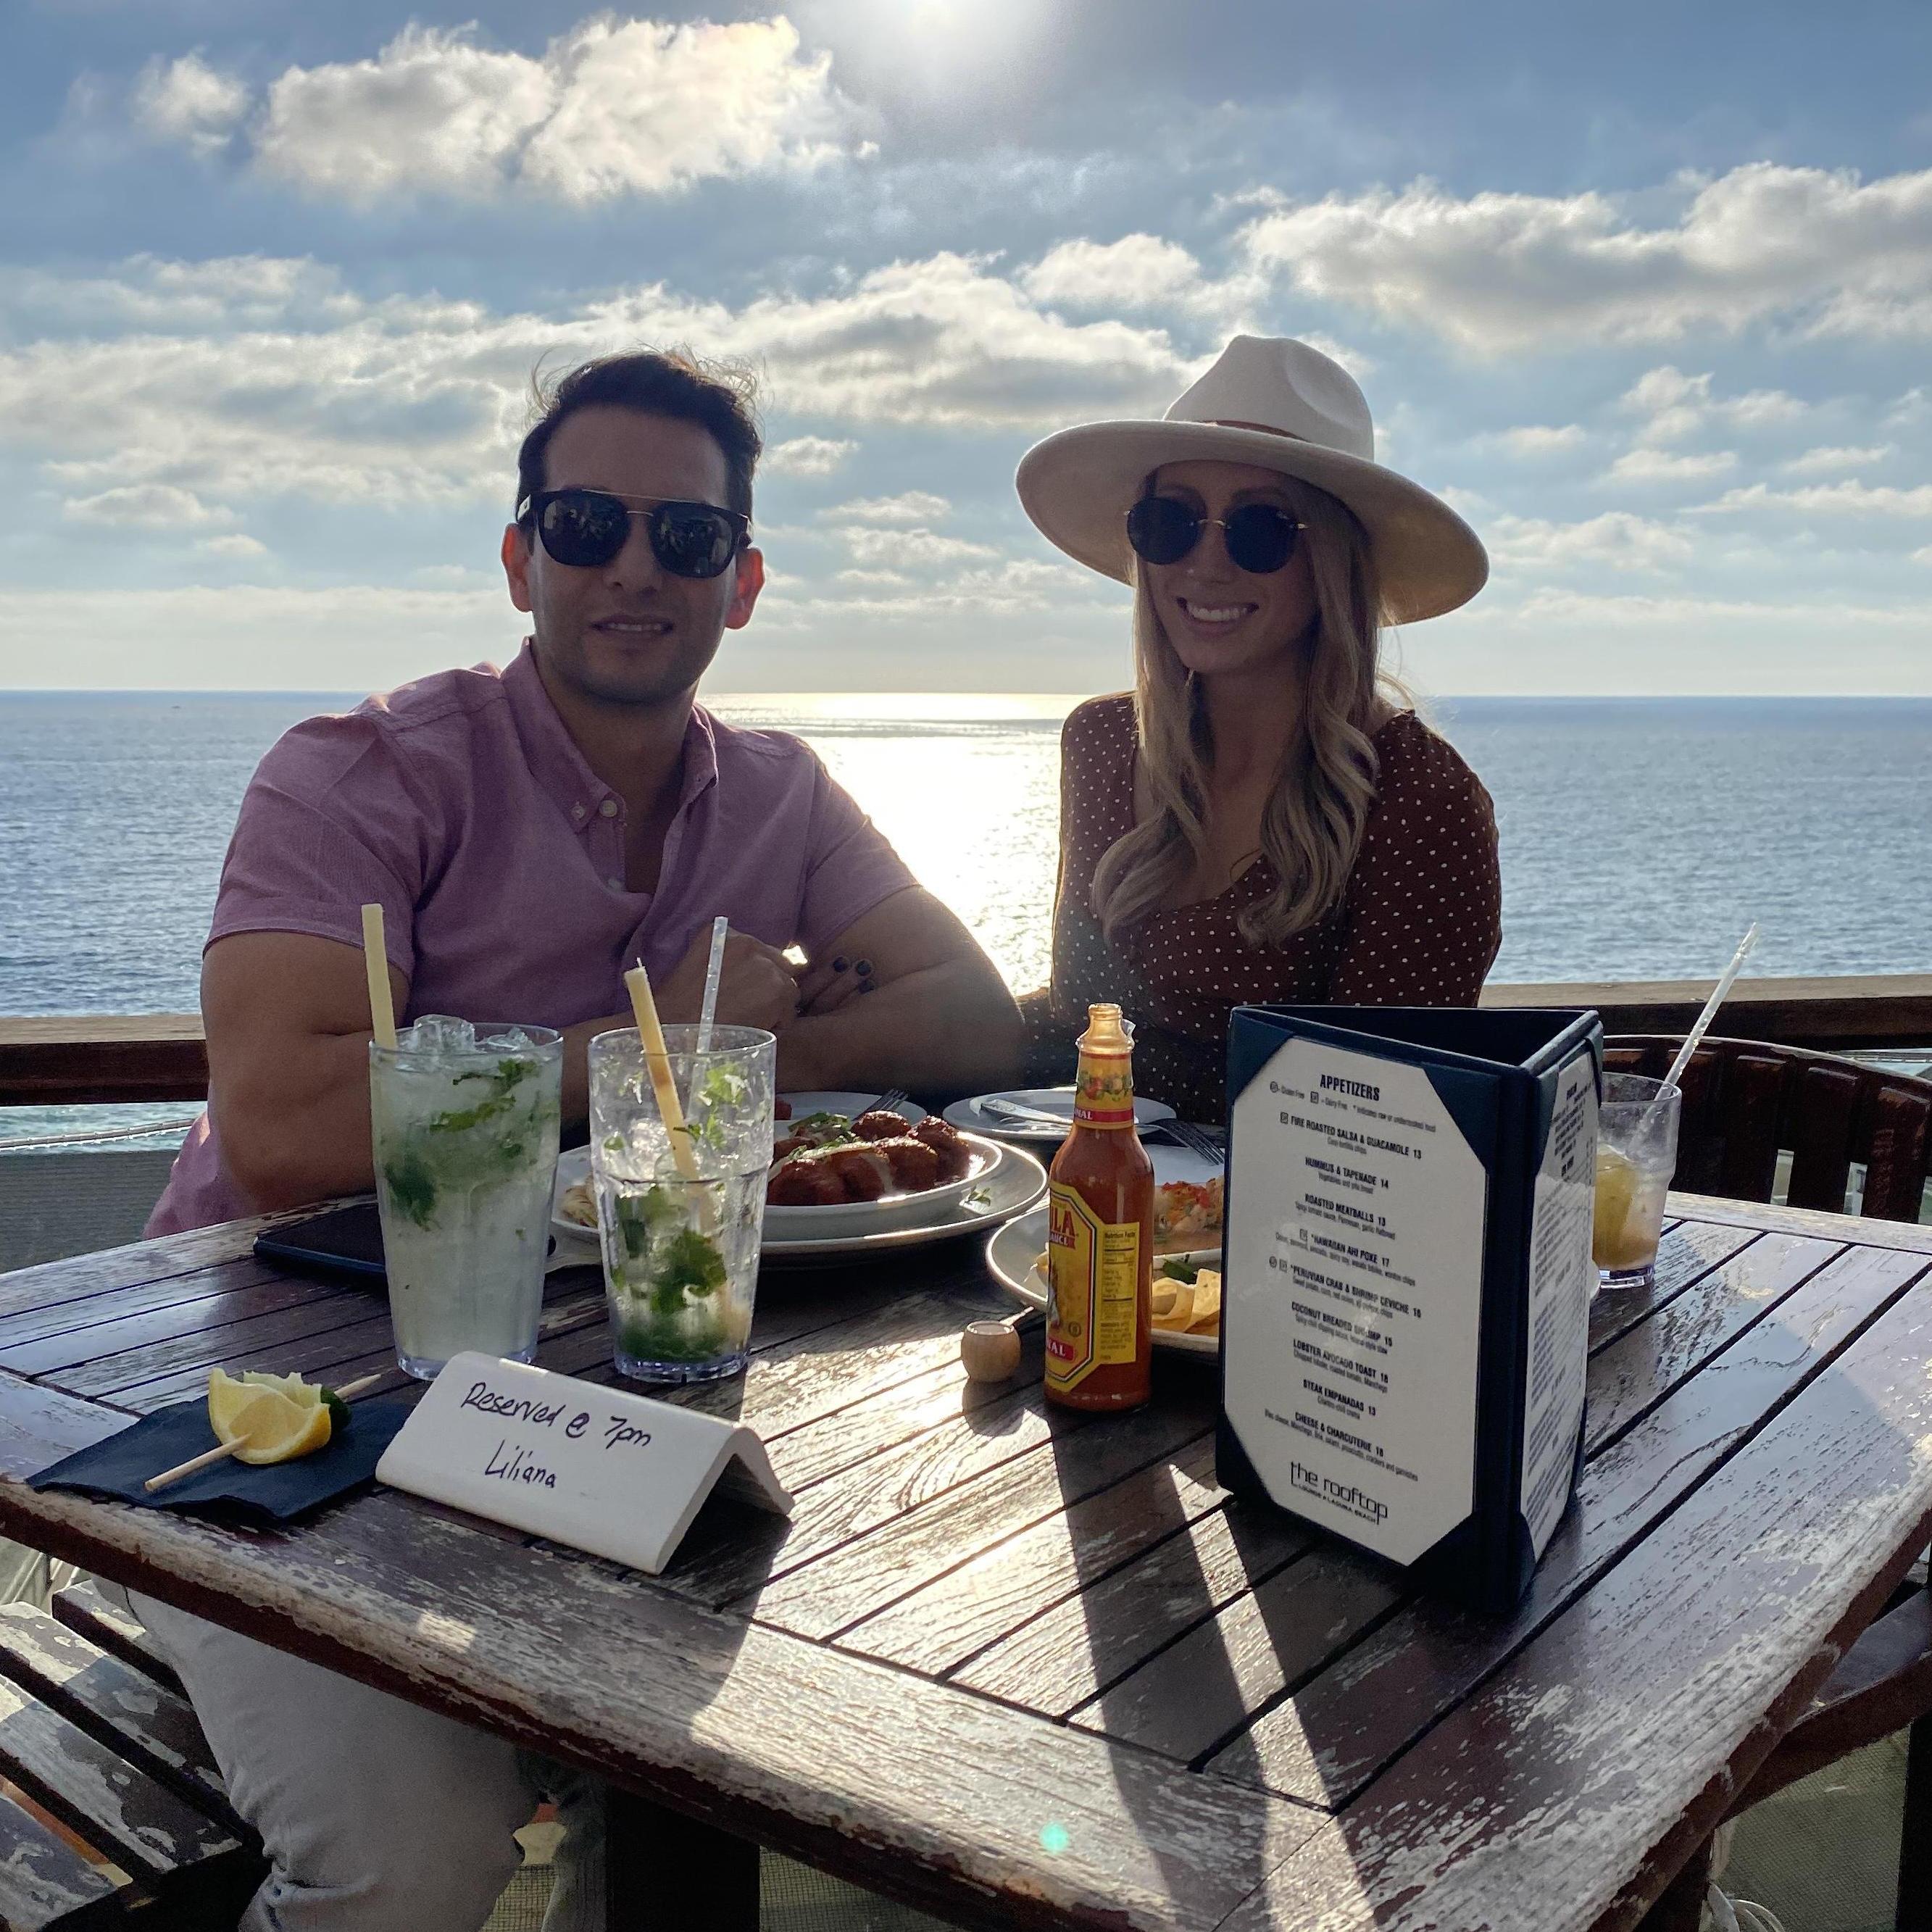 A little Saturday day date in Laguna Beach. We had the best view that day, and the best mojitos